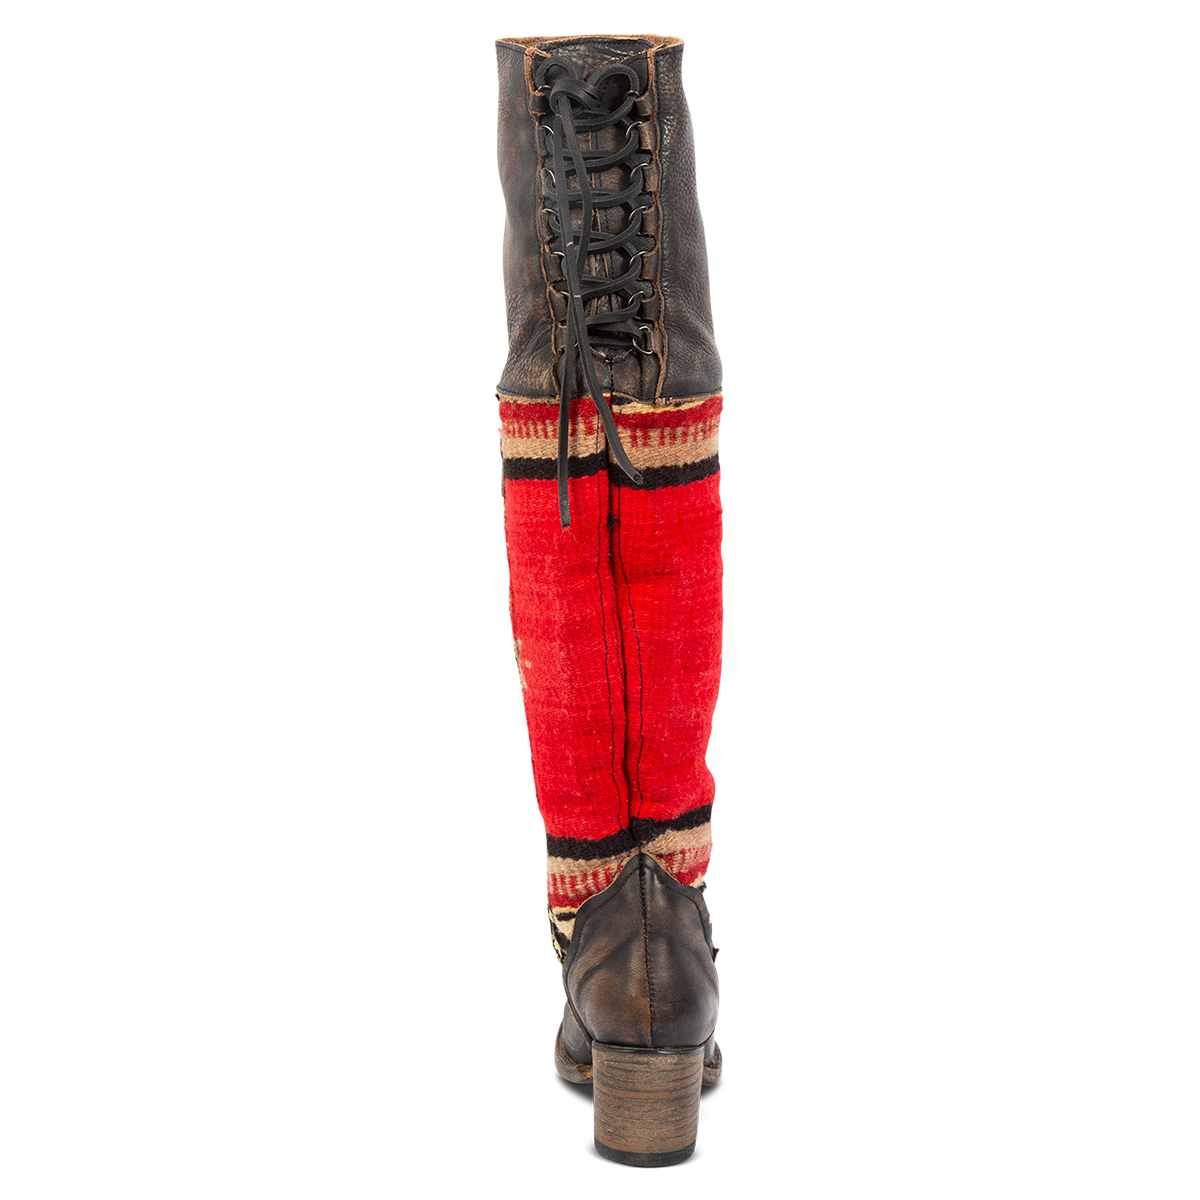 Back view showing adjustable leather lacing, a stacked heel and multi-colored woven detailing on FREEBIRD women's Serape black leather knee high boot